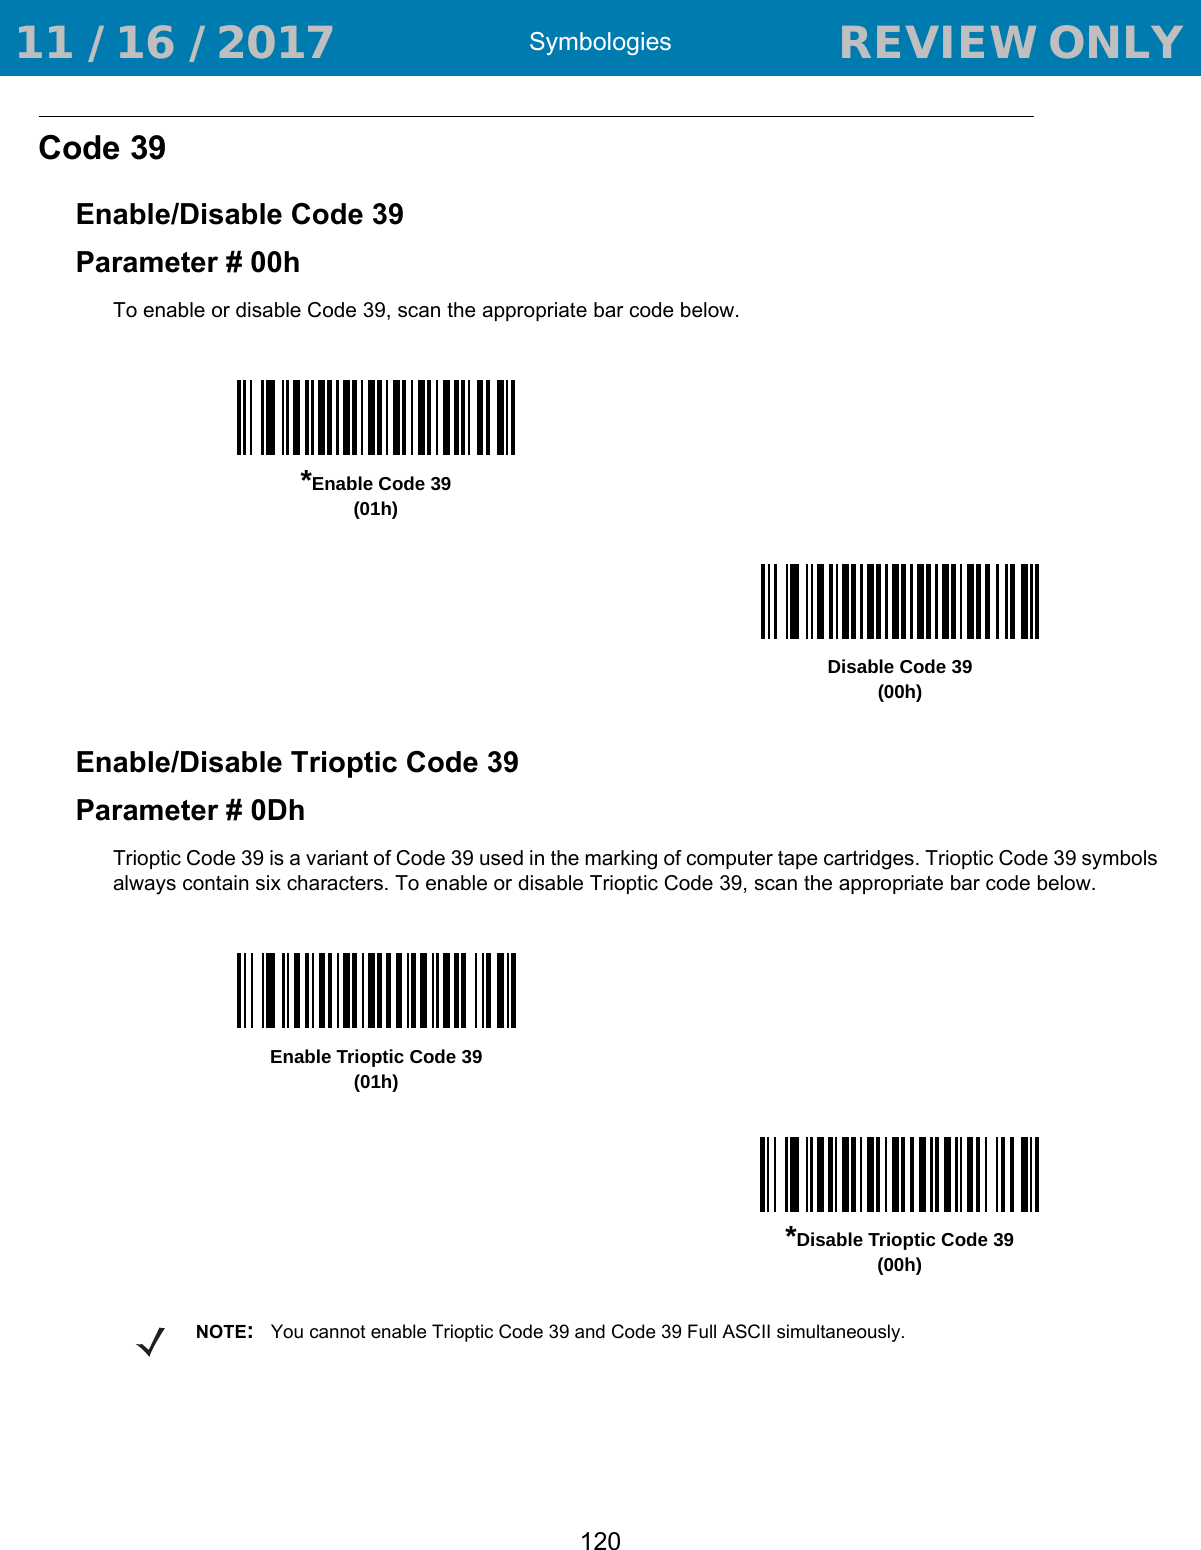 Symbologies120Code 39Enable/Disable Code 39Parameter # 00hTo enable or disable Code 39, scan the appropriate bar code below.Enable/Disable Trioptic Code 39Parameter # 0DhTrioptic Code 39 is a variant of Code 39 used in the marking of computer tape cartridges. Trioptic Code 39 symbols always contain six characters. To enable or disable Trioptic Code 39, scan the appropriate bar code below. *Enable Code 39(01h)Disable Code 39(00h)Enable Trioptic Code 39(01h)*Disable Trioptic Code 39(00h)NOTE:You cannot enable Trioptic Code 39 and Code 39 Full ASCII simultaneously.  11 / 16 / 2017                                  REVIEW ONLY                             REVIEW ONLY - REVIEW ONLY - REVIEW ONLY